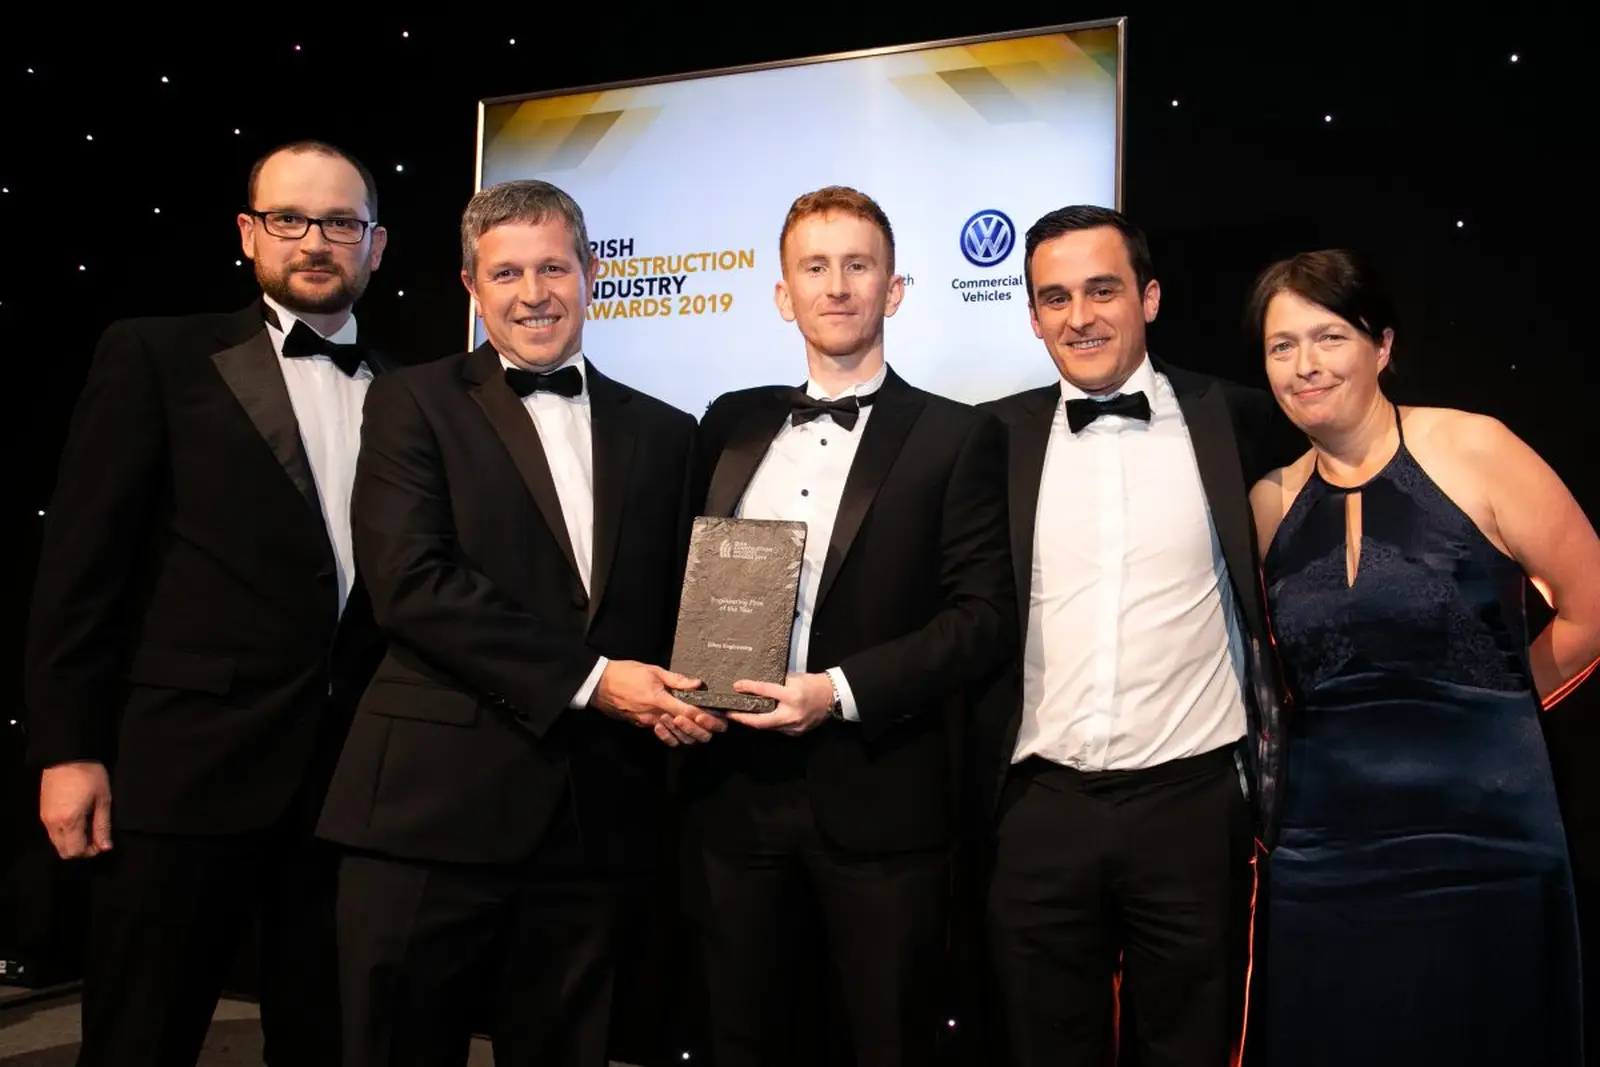 Ethos Engineering retain the title Engineering Firm of the year 2019 at the Irish Construction Industry Awards 2019